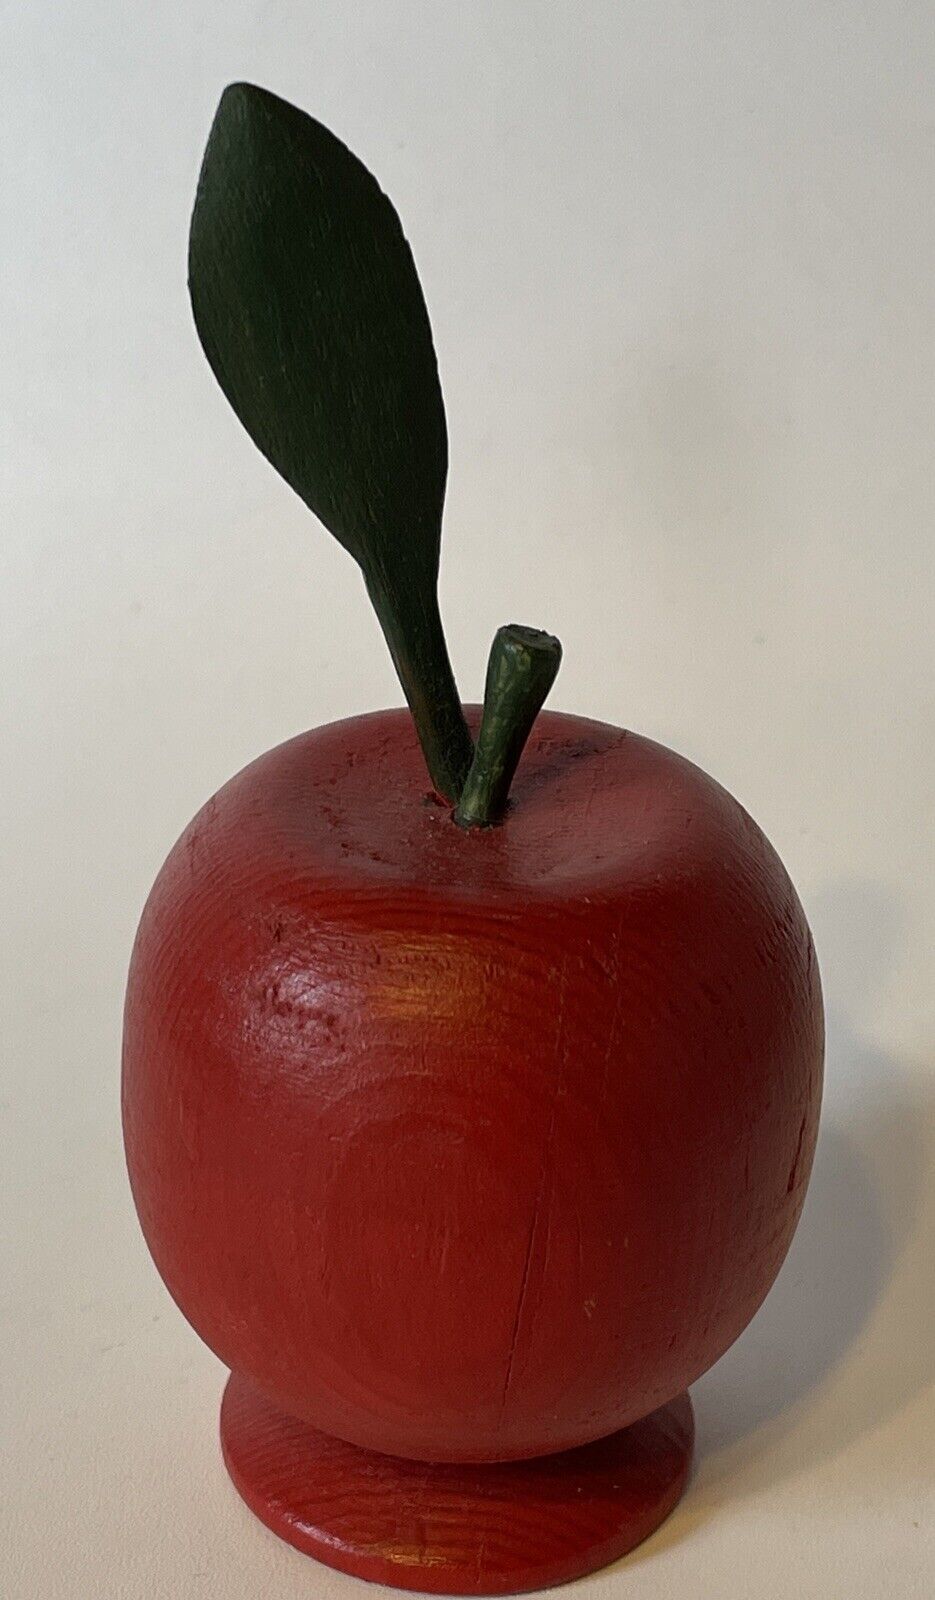 Wooden Apple Figure Red & Green 4.5” Tall